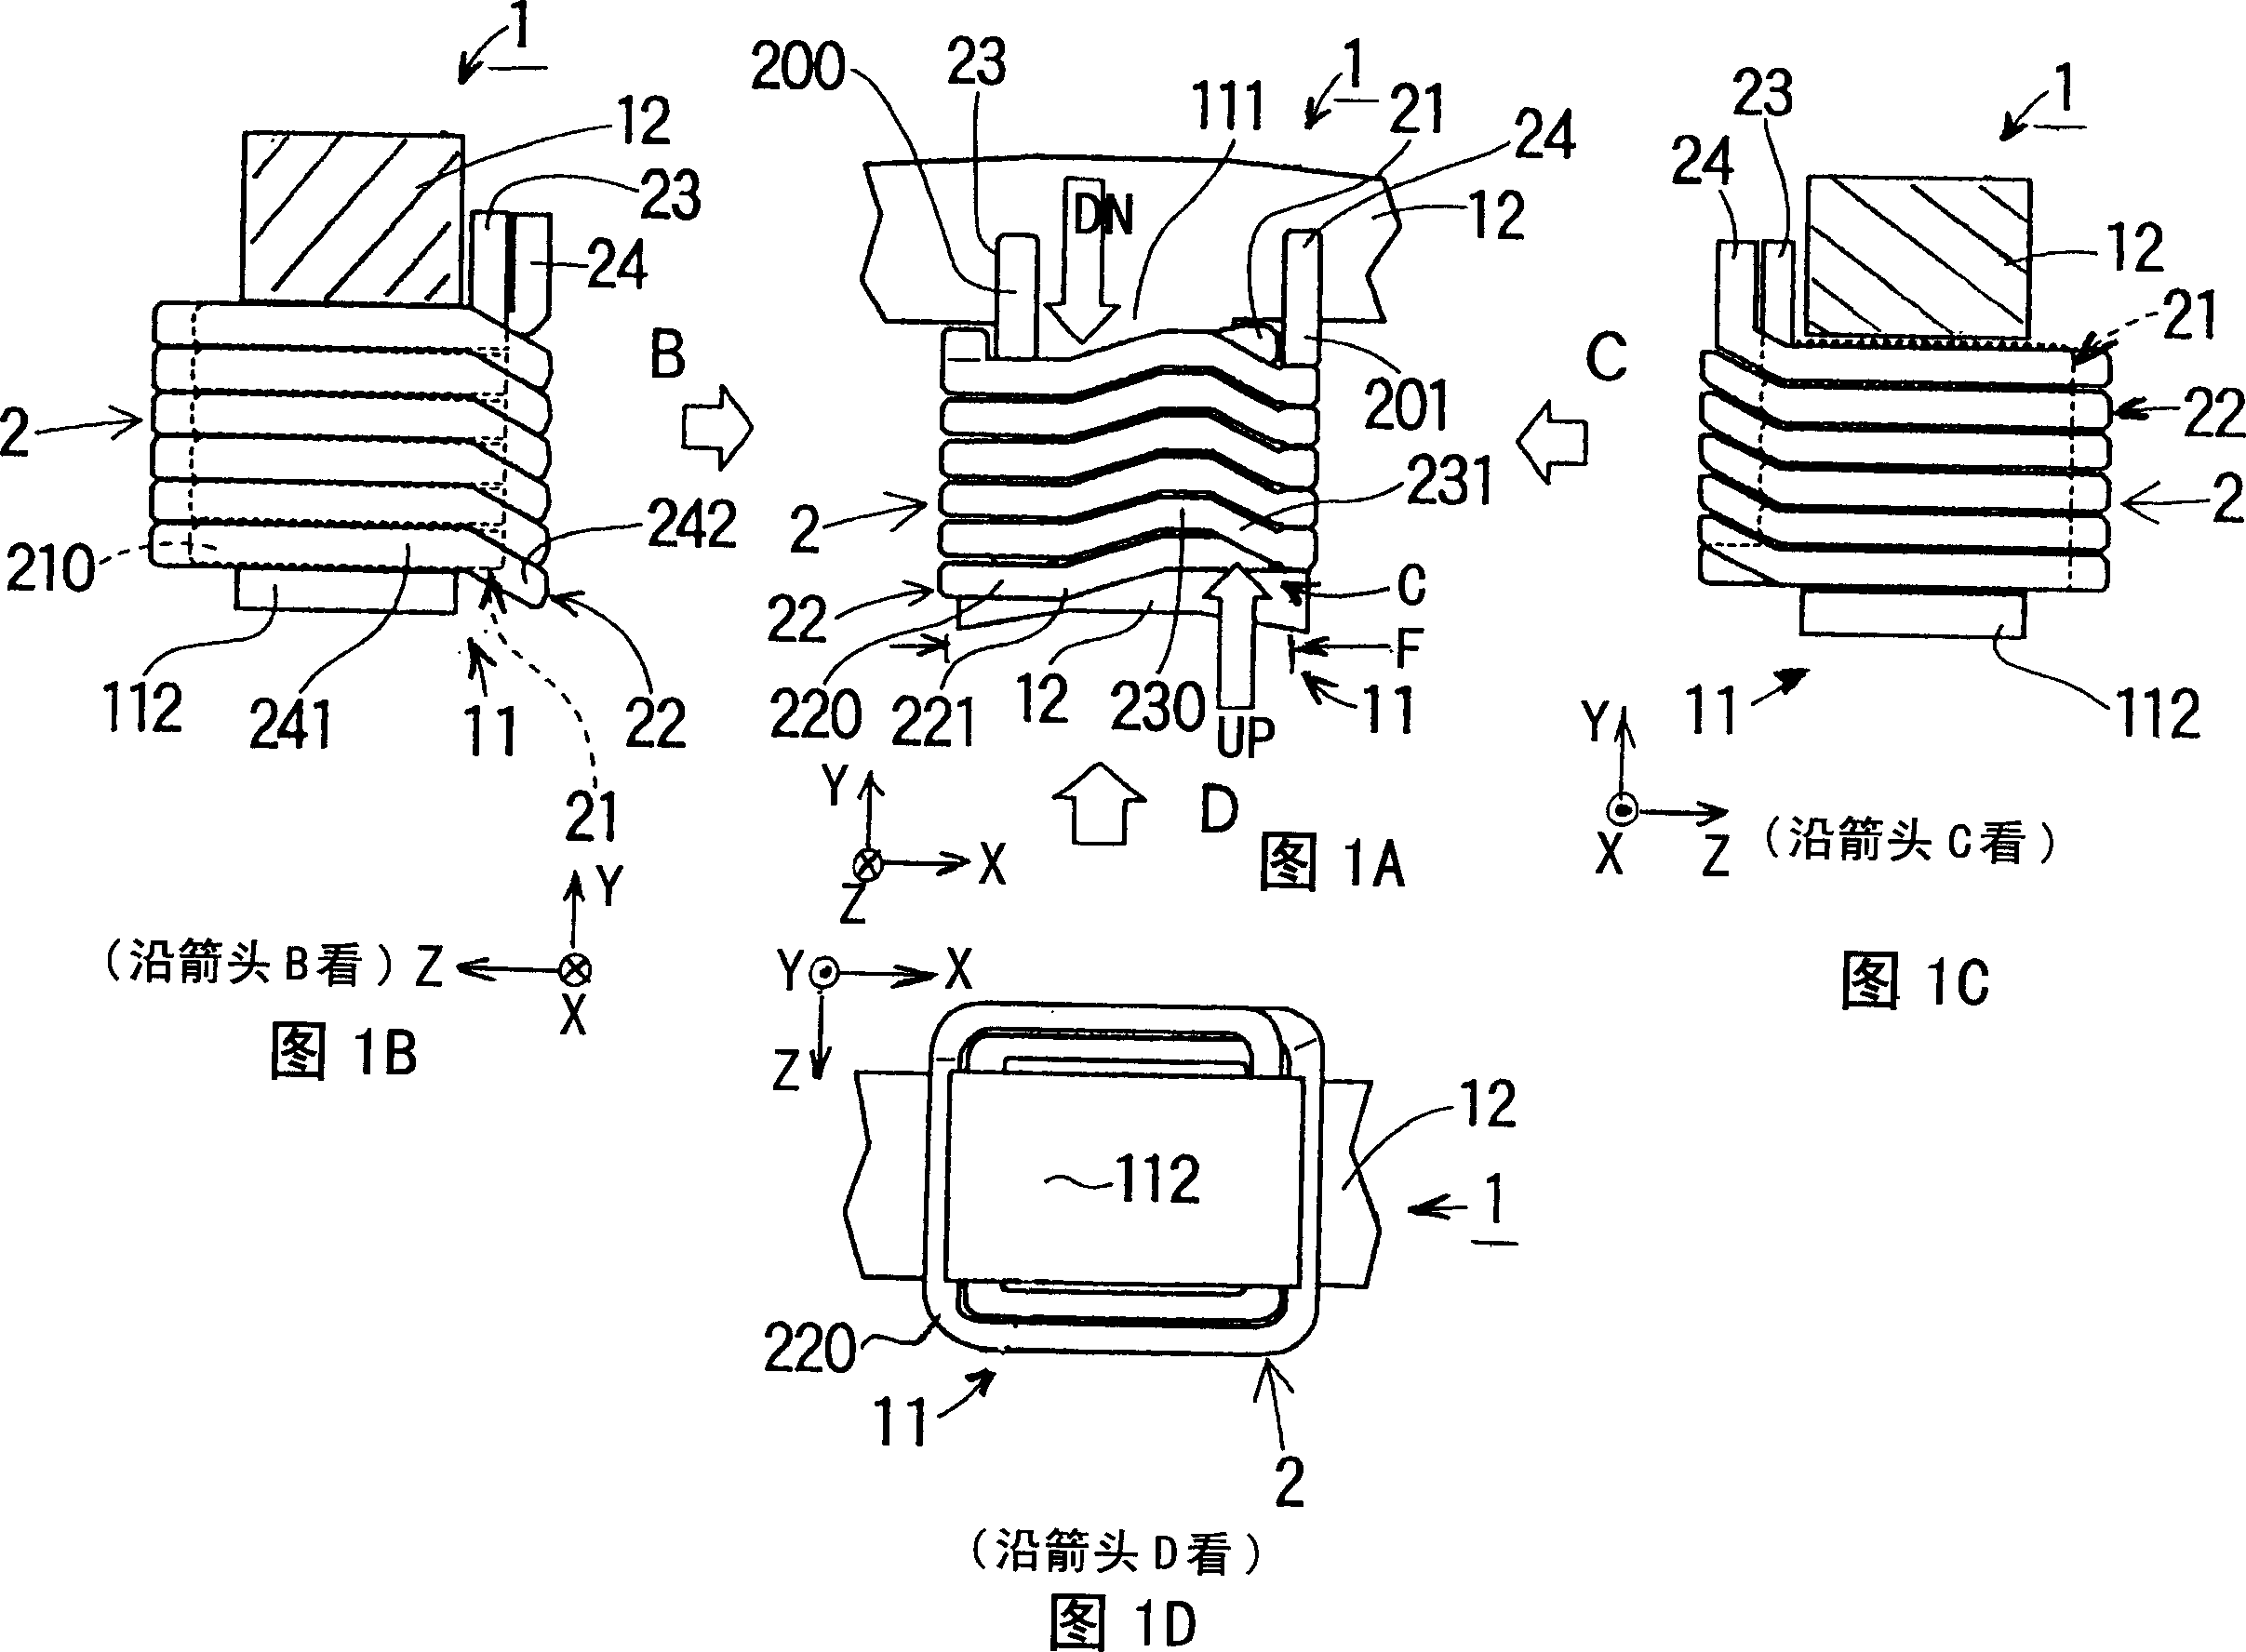 Integral winding stator coil assembly of rotating machine